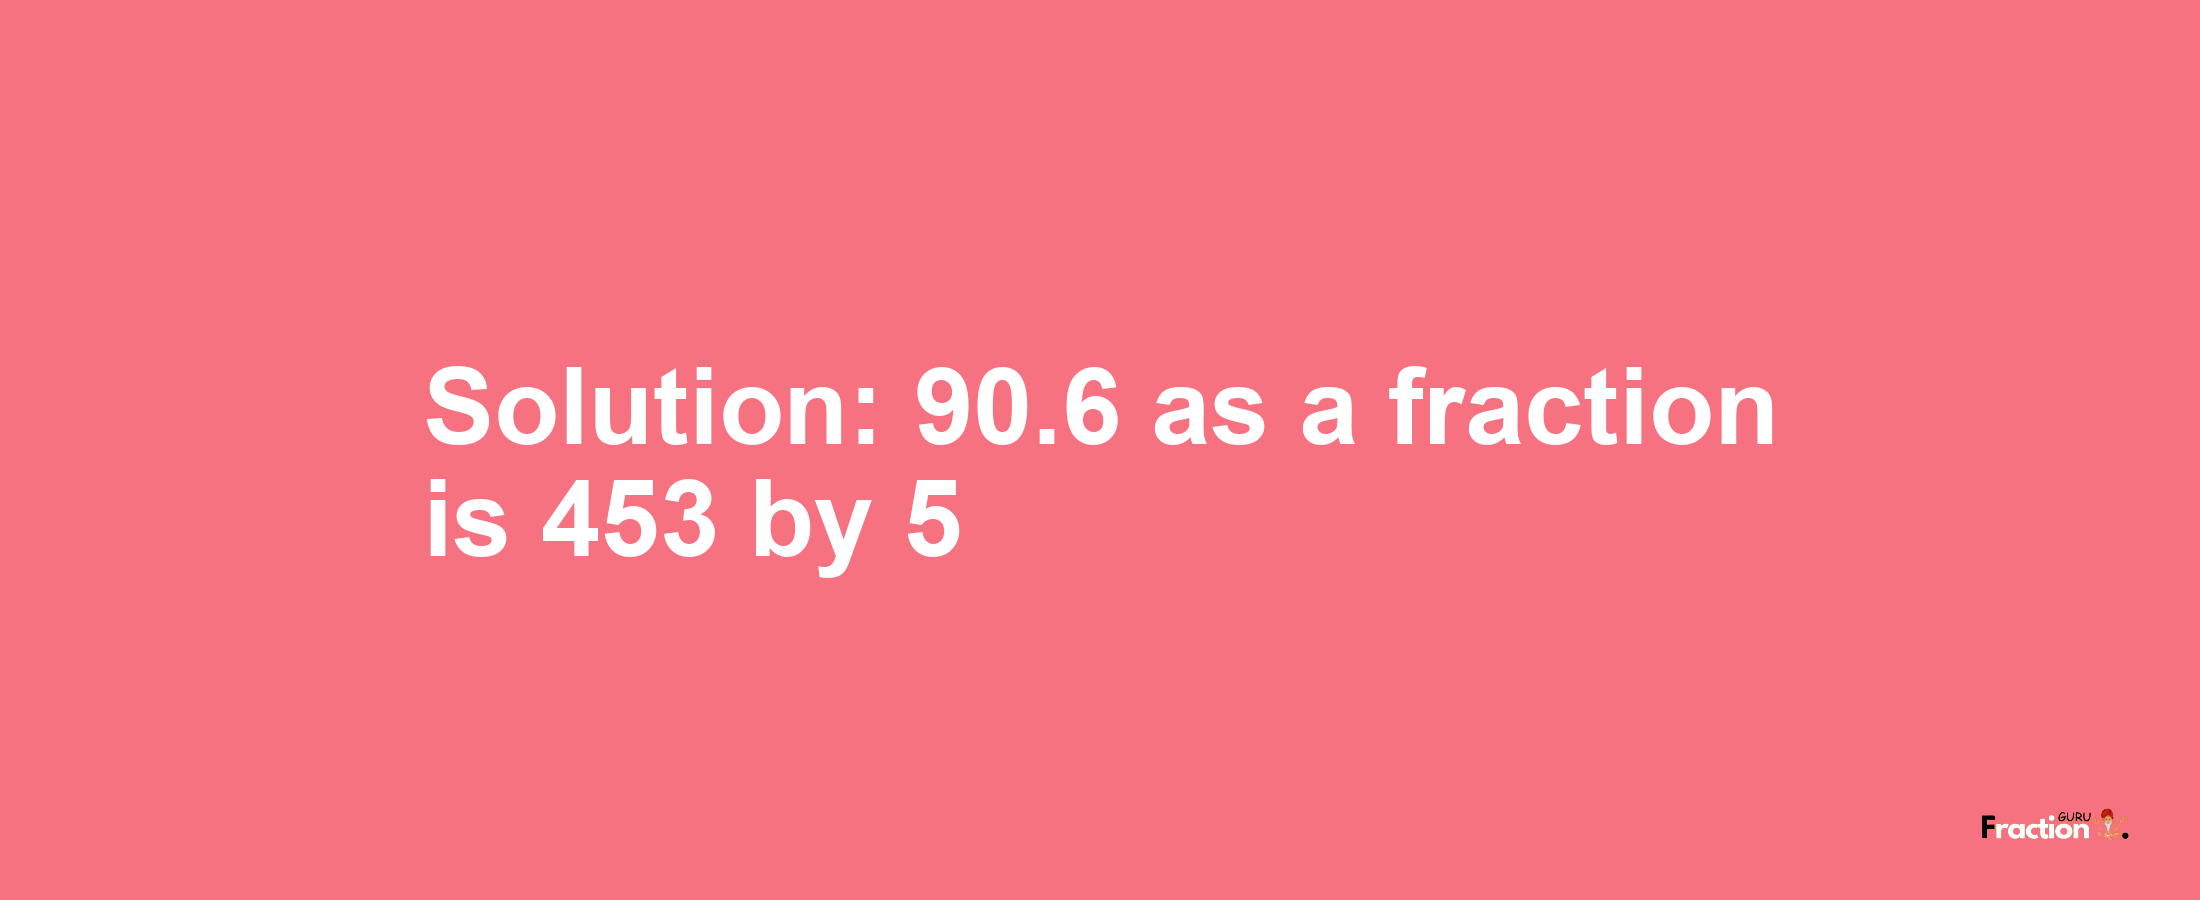 Solution:90.6 as a fraction is 453/5